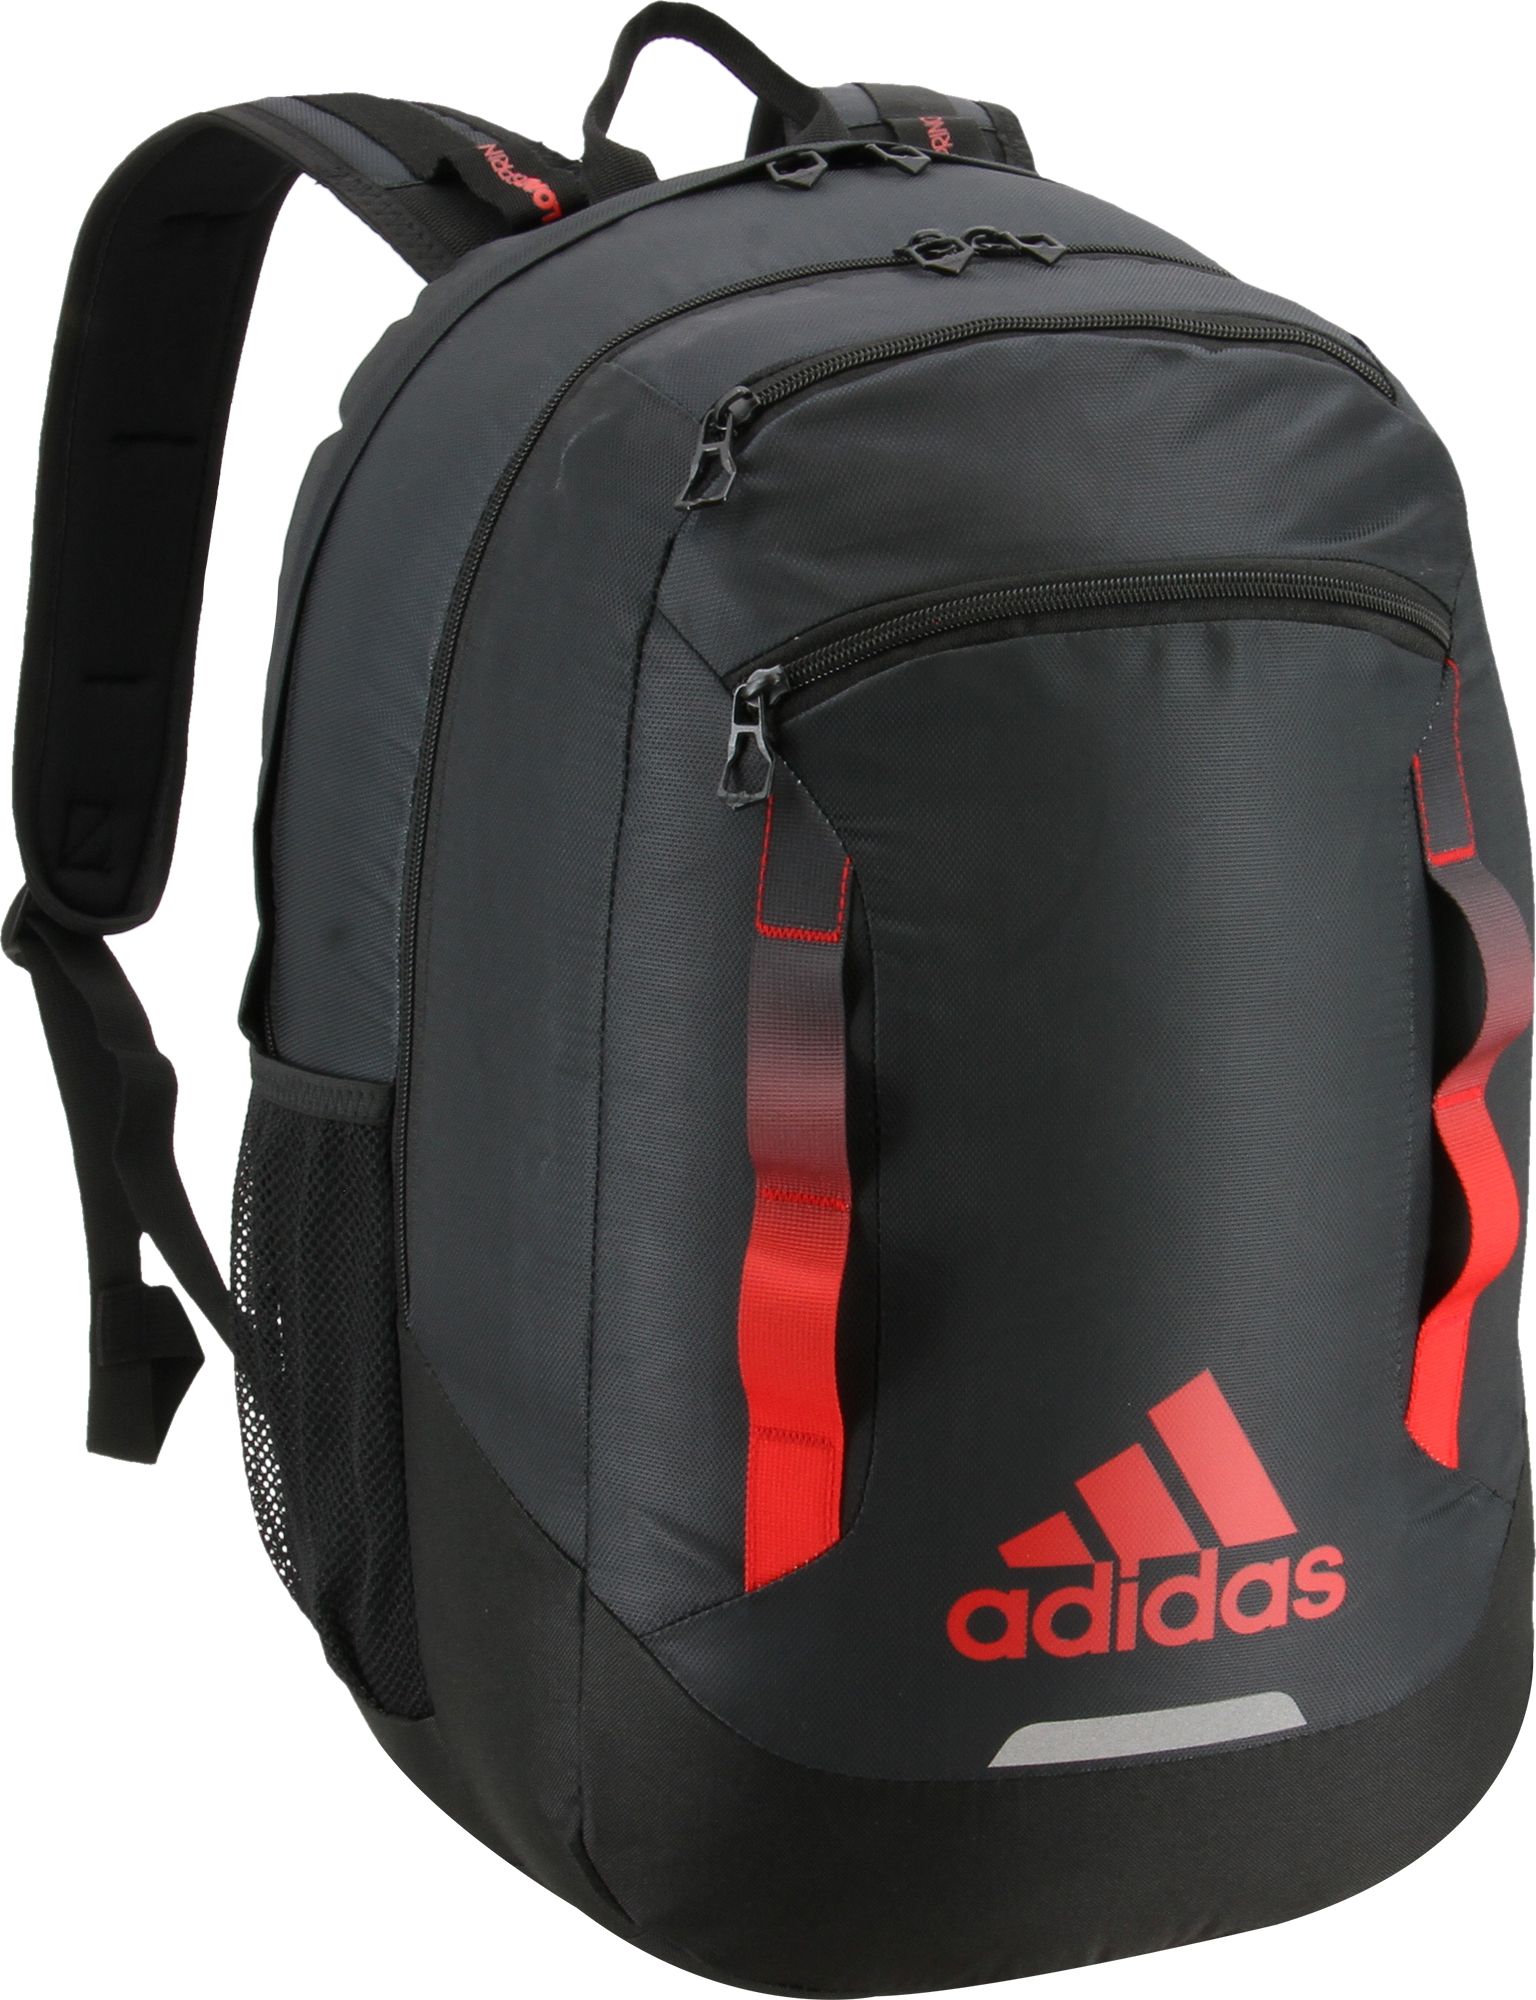 adidas rival backpack review